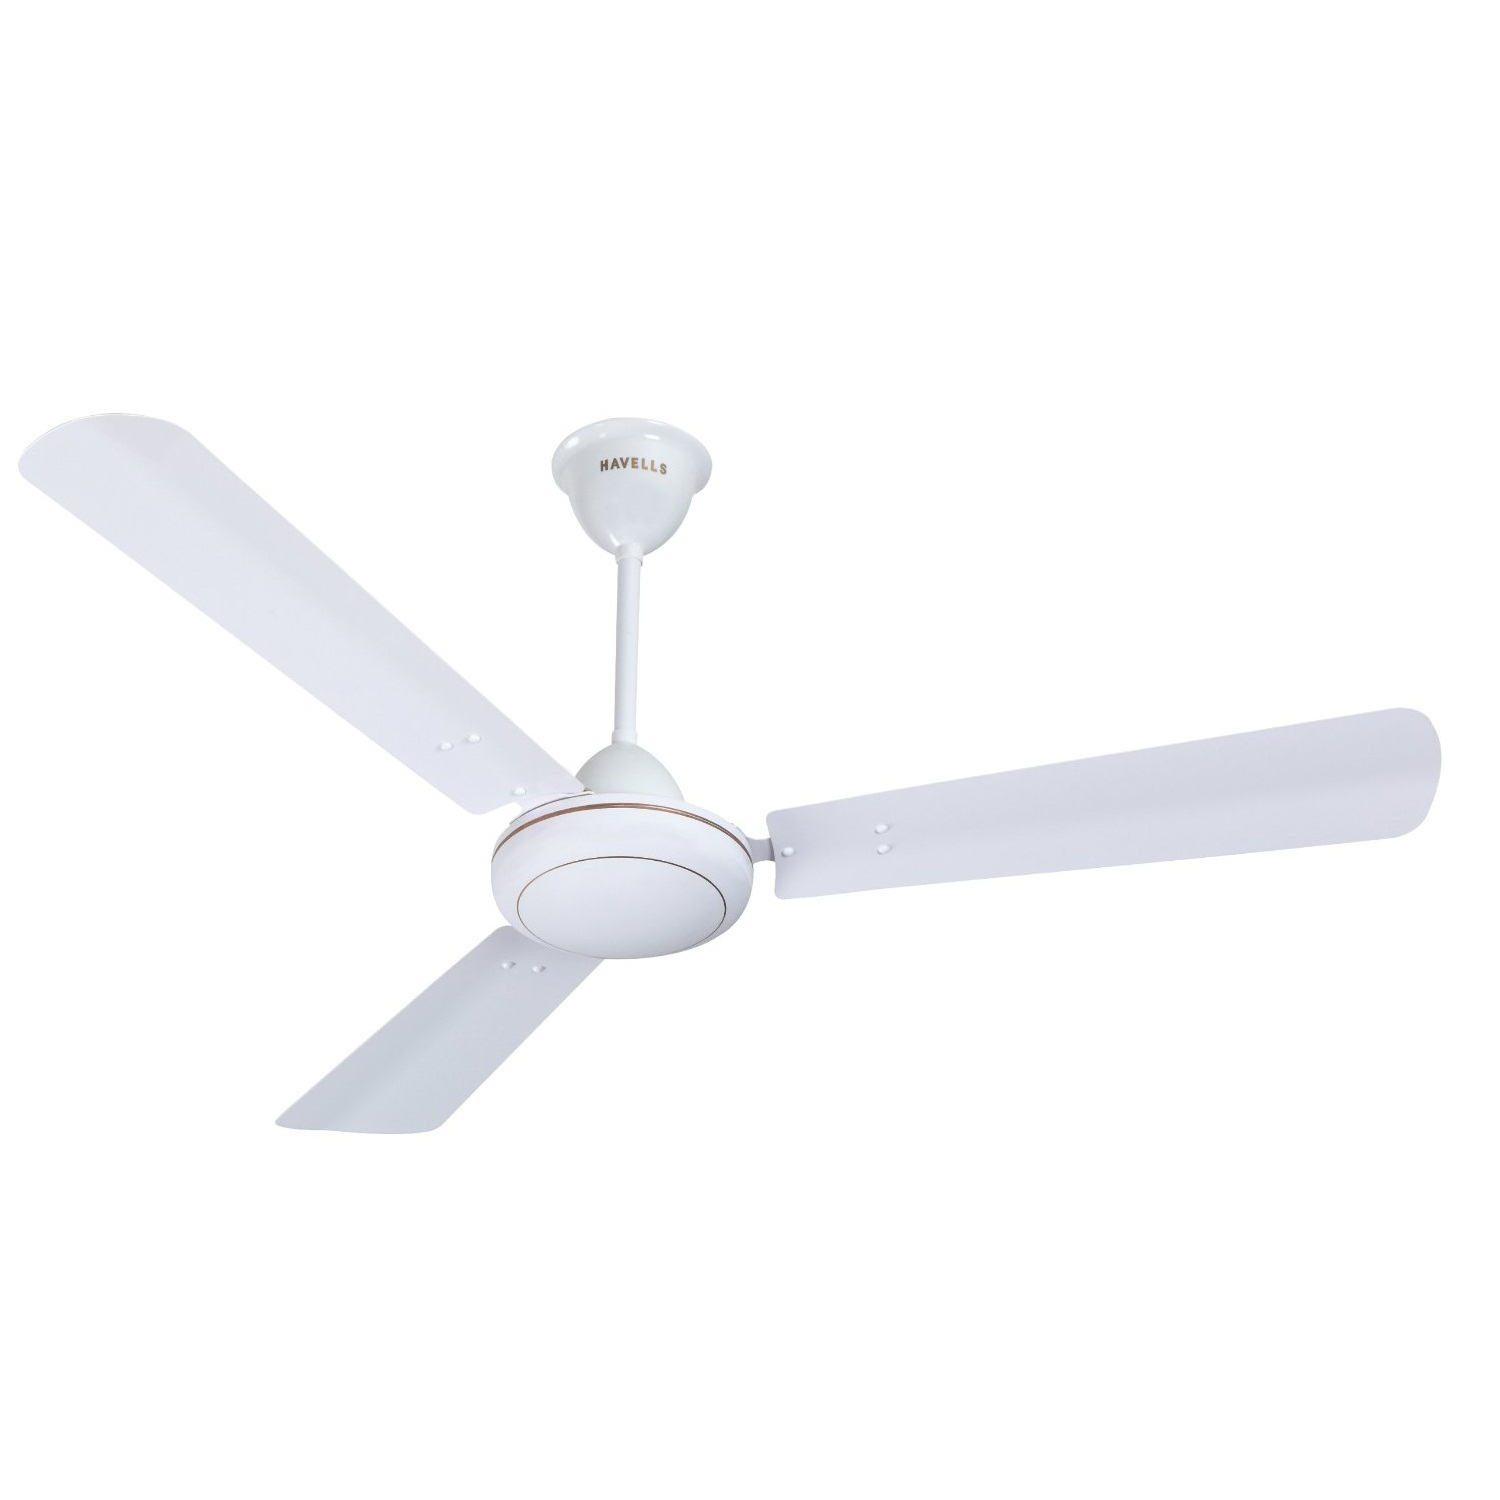 Havells Ss 390 900mm Ceiling Fan pertaining to dimensions 1500 X 1500